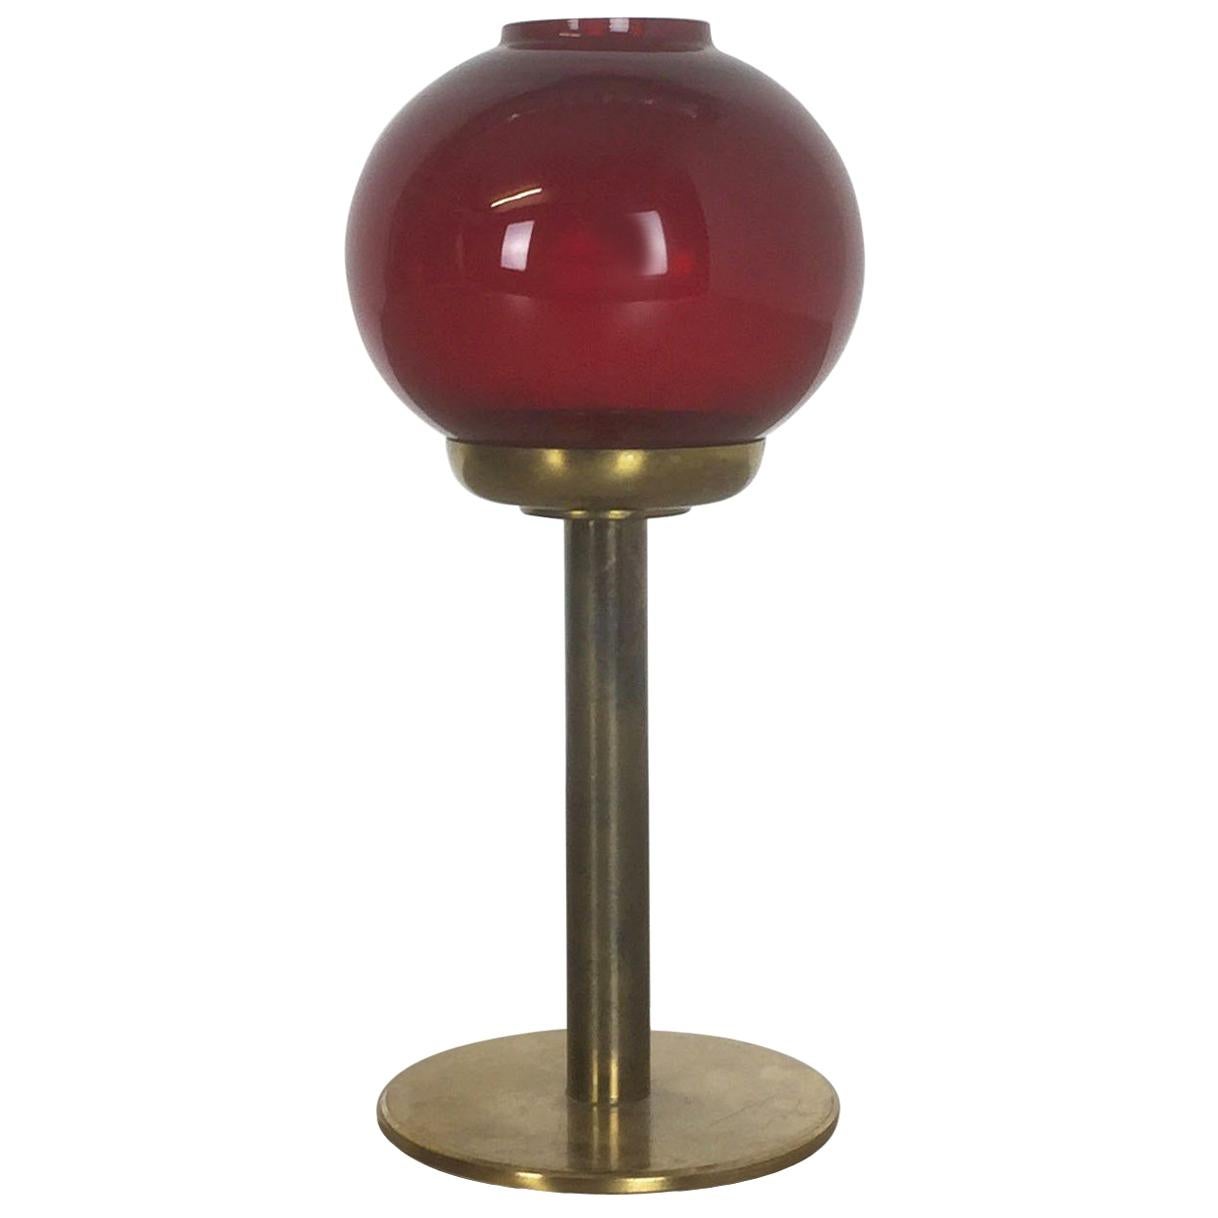 Vintage Red Glass and Brass Candleholder by Hans-Agne Jakobsson, Sweden, 1950s